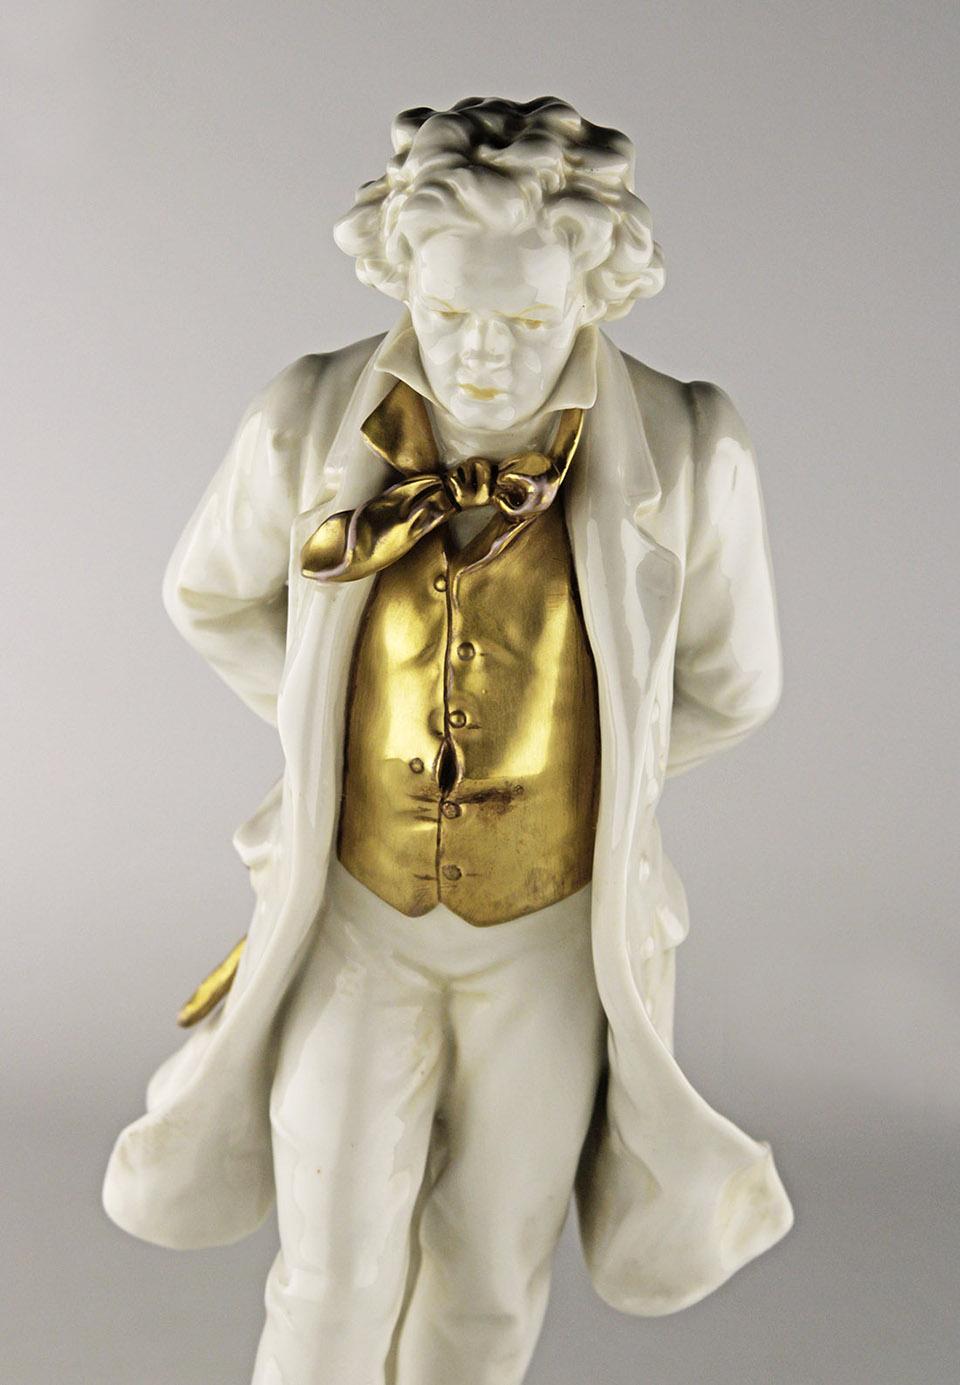 20th Century Early 20th C. French Glazed and Gilt Porcelain Beethoven Sculpture with Base